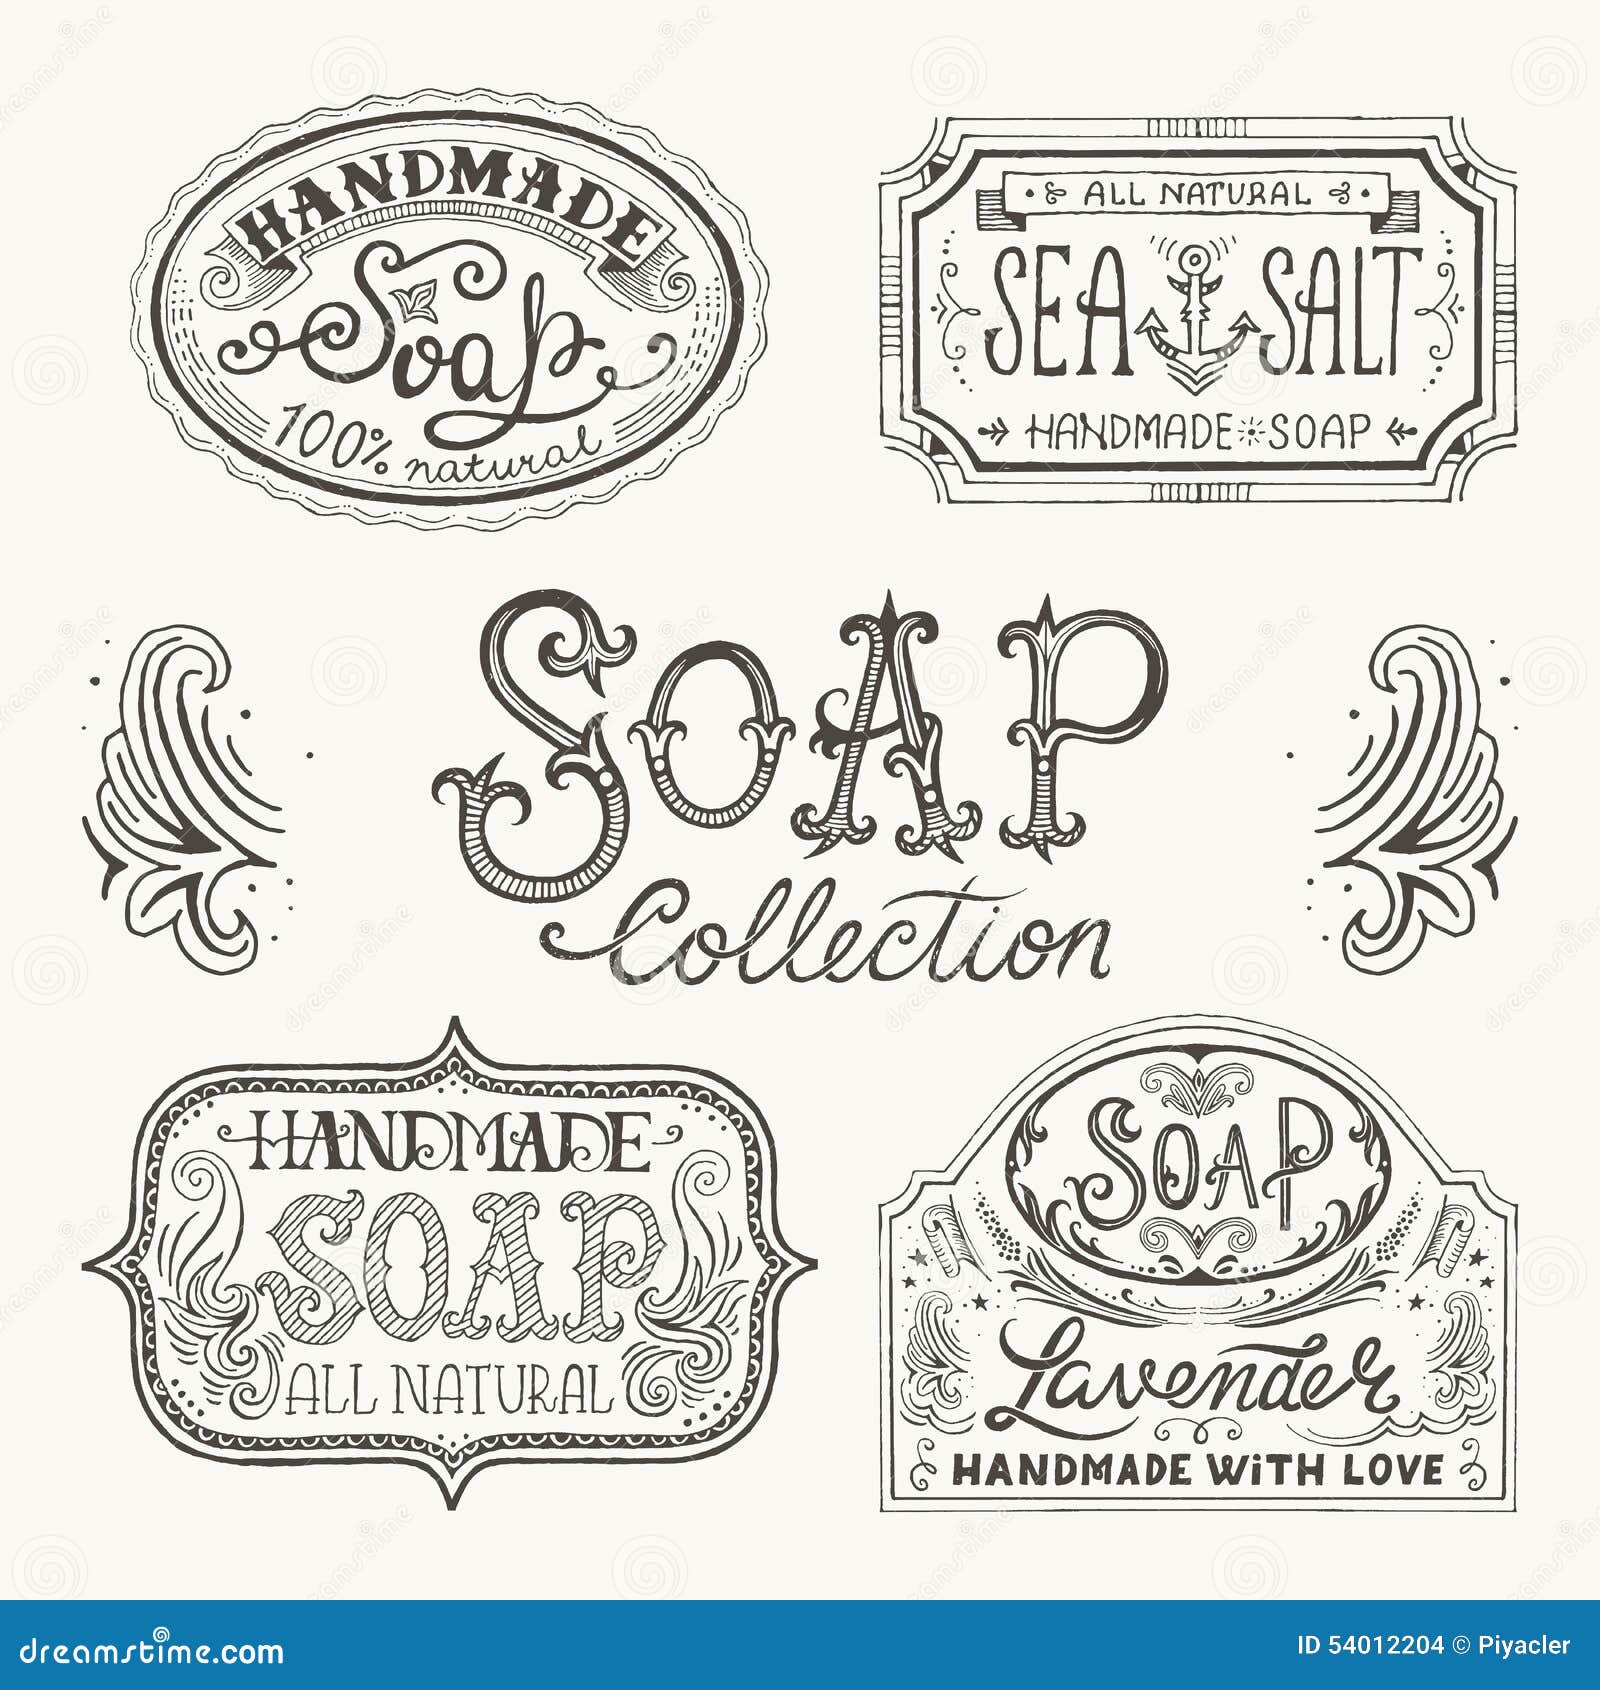 Hand Drawn Labels And Patterns For Handmade Soap Bars. Stock Vector